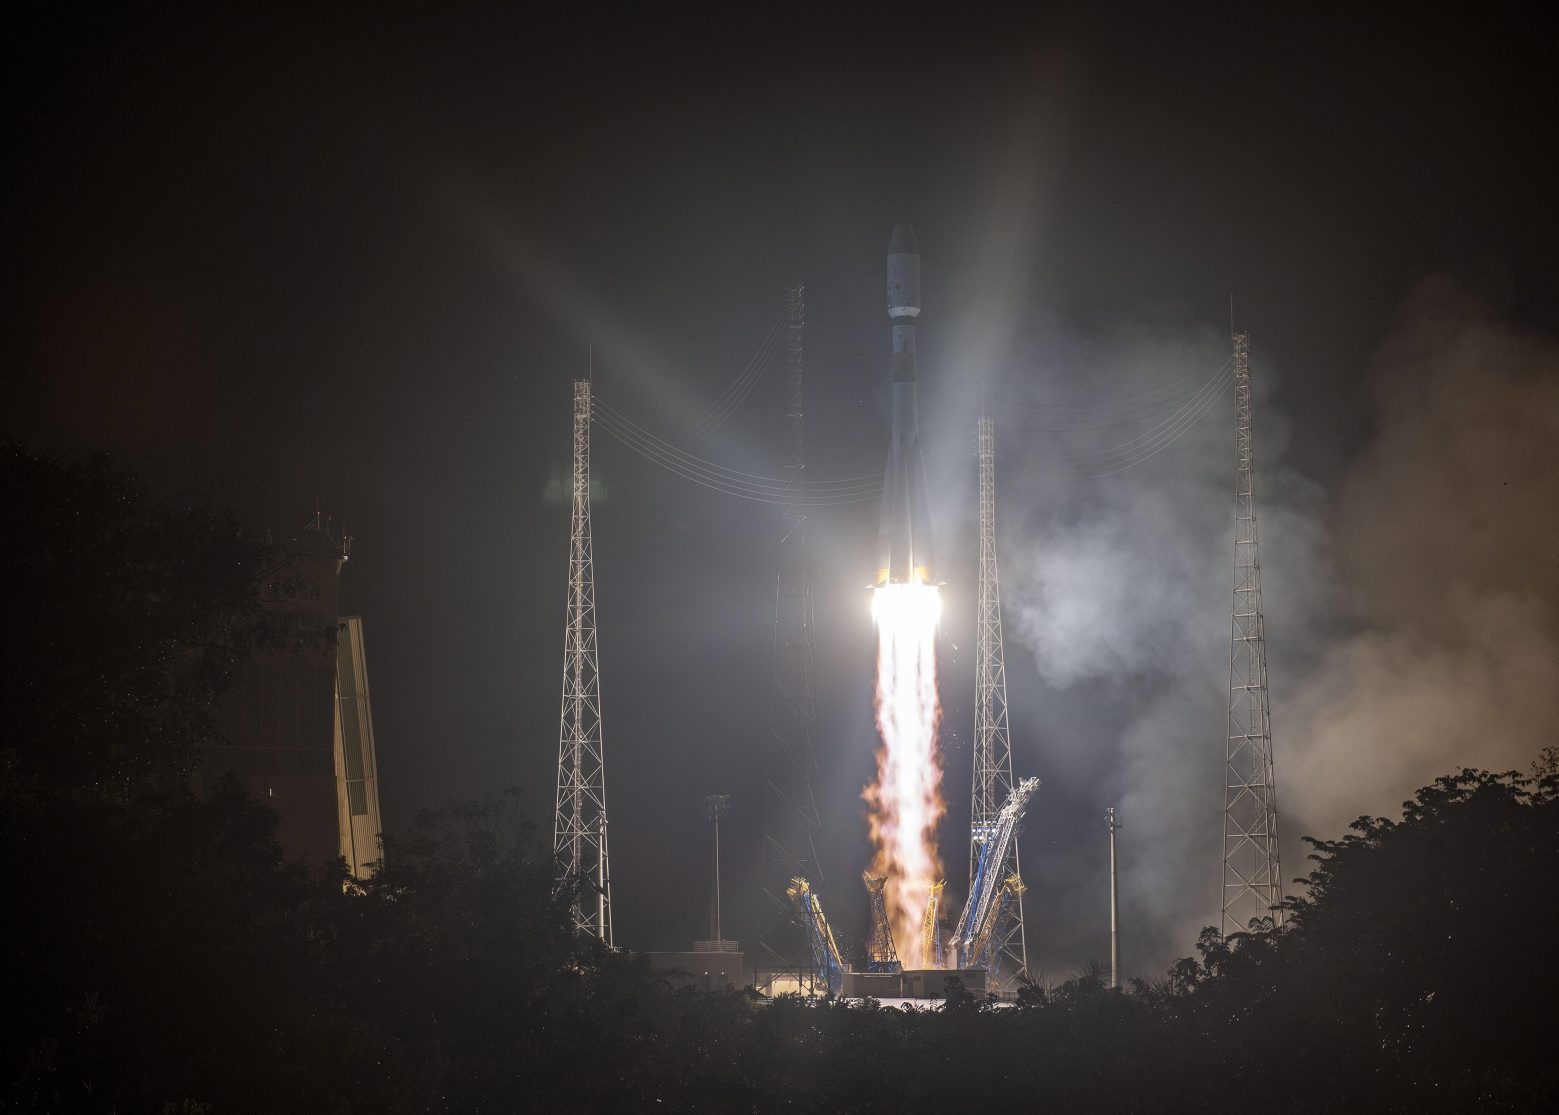 epa08078767 A handout photo made available by ESA-CNES-ARIANESPACE shows the Soyuz VS23 rocket transprting ESA's Cheops satellite and other satellites into space during launch at Europe's Spaceport in Kourou, French Guiana, 18 December 2019. ESA successfully launched CHEOPS, its 'Characterising Exoplanet Satellite', which was originally planned to launch a day earlier, but had been to be postponed due to a software problem.  EPA/JM GUILLON / ESA-CNES-ARIANESPAC MANDATORY CREDIT HANDOUT EDITORIAL USE ONLY/NO SALES FRENCH GUIANA ESA CHEOPS SATELLITE